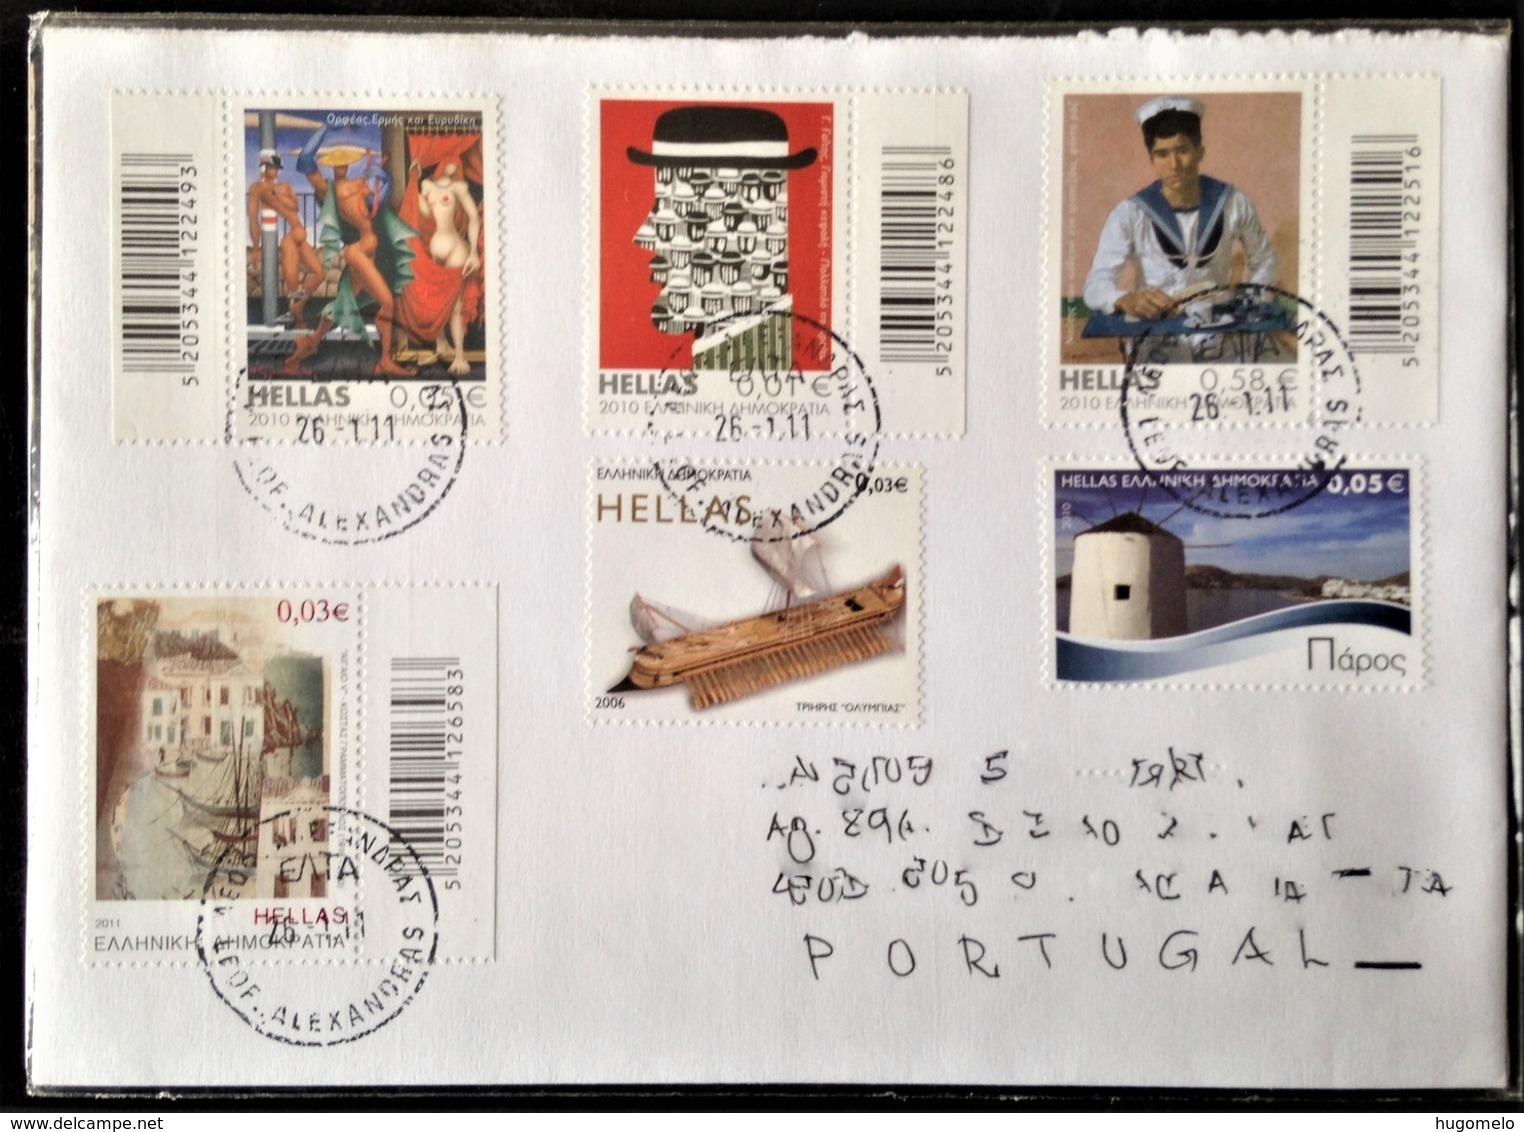 Greece, Circulated Cover To Portugal, "Painting", "Famous People", "Greek Islands", "Paros", "Engraving" 2011 - Covers & Documents